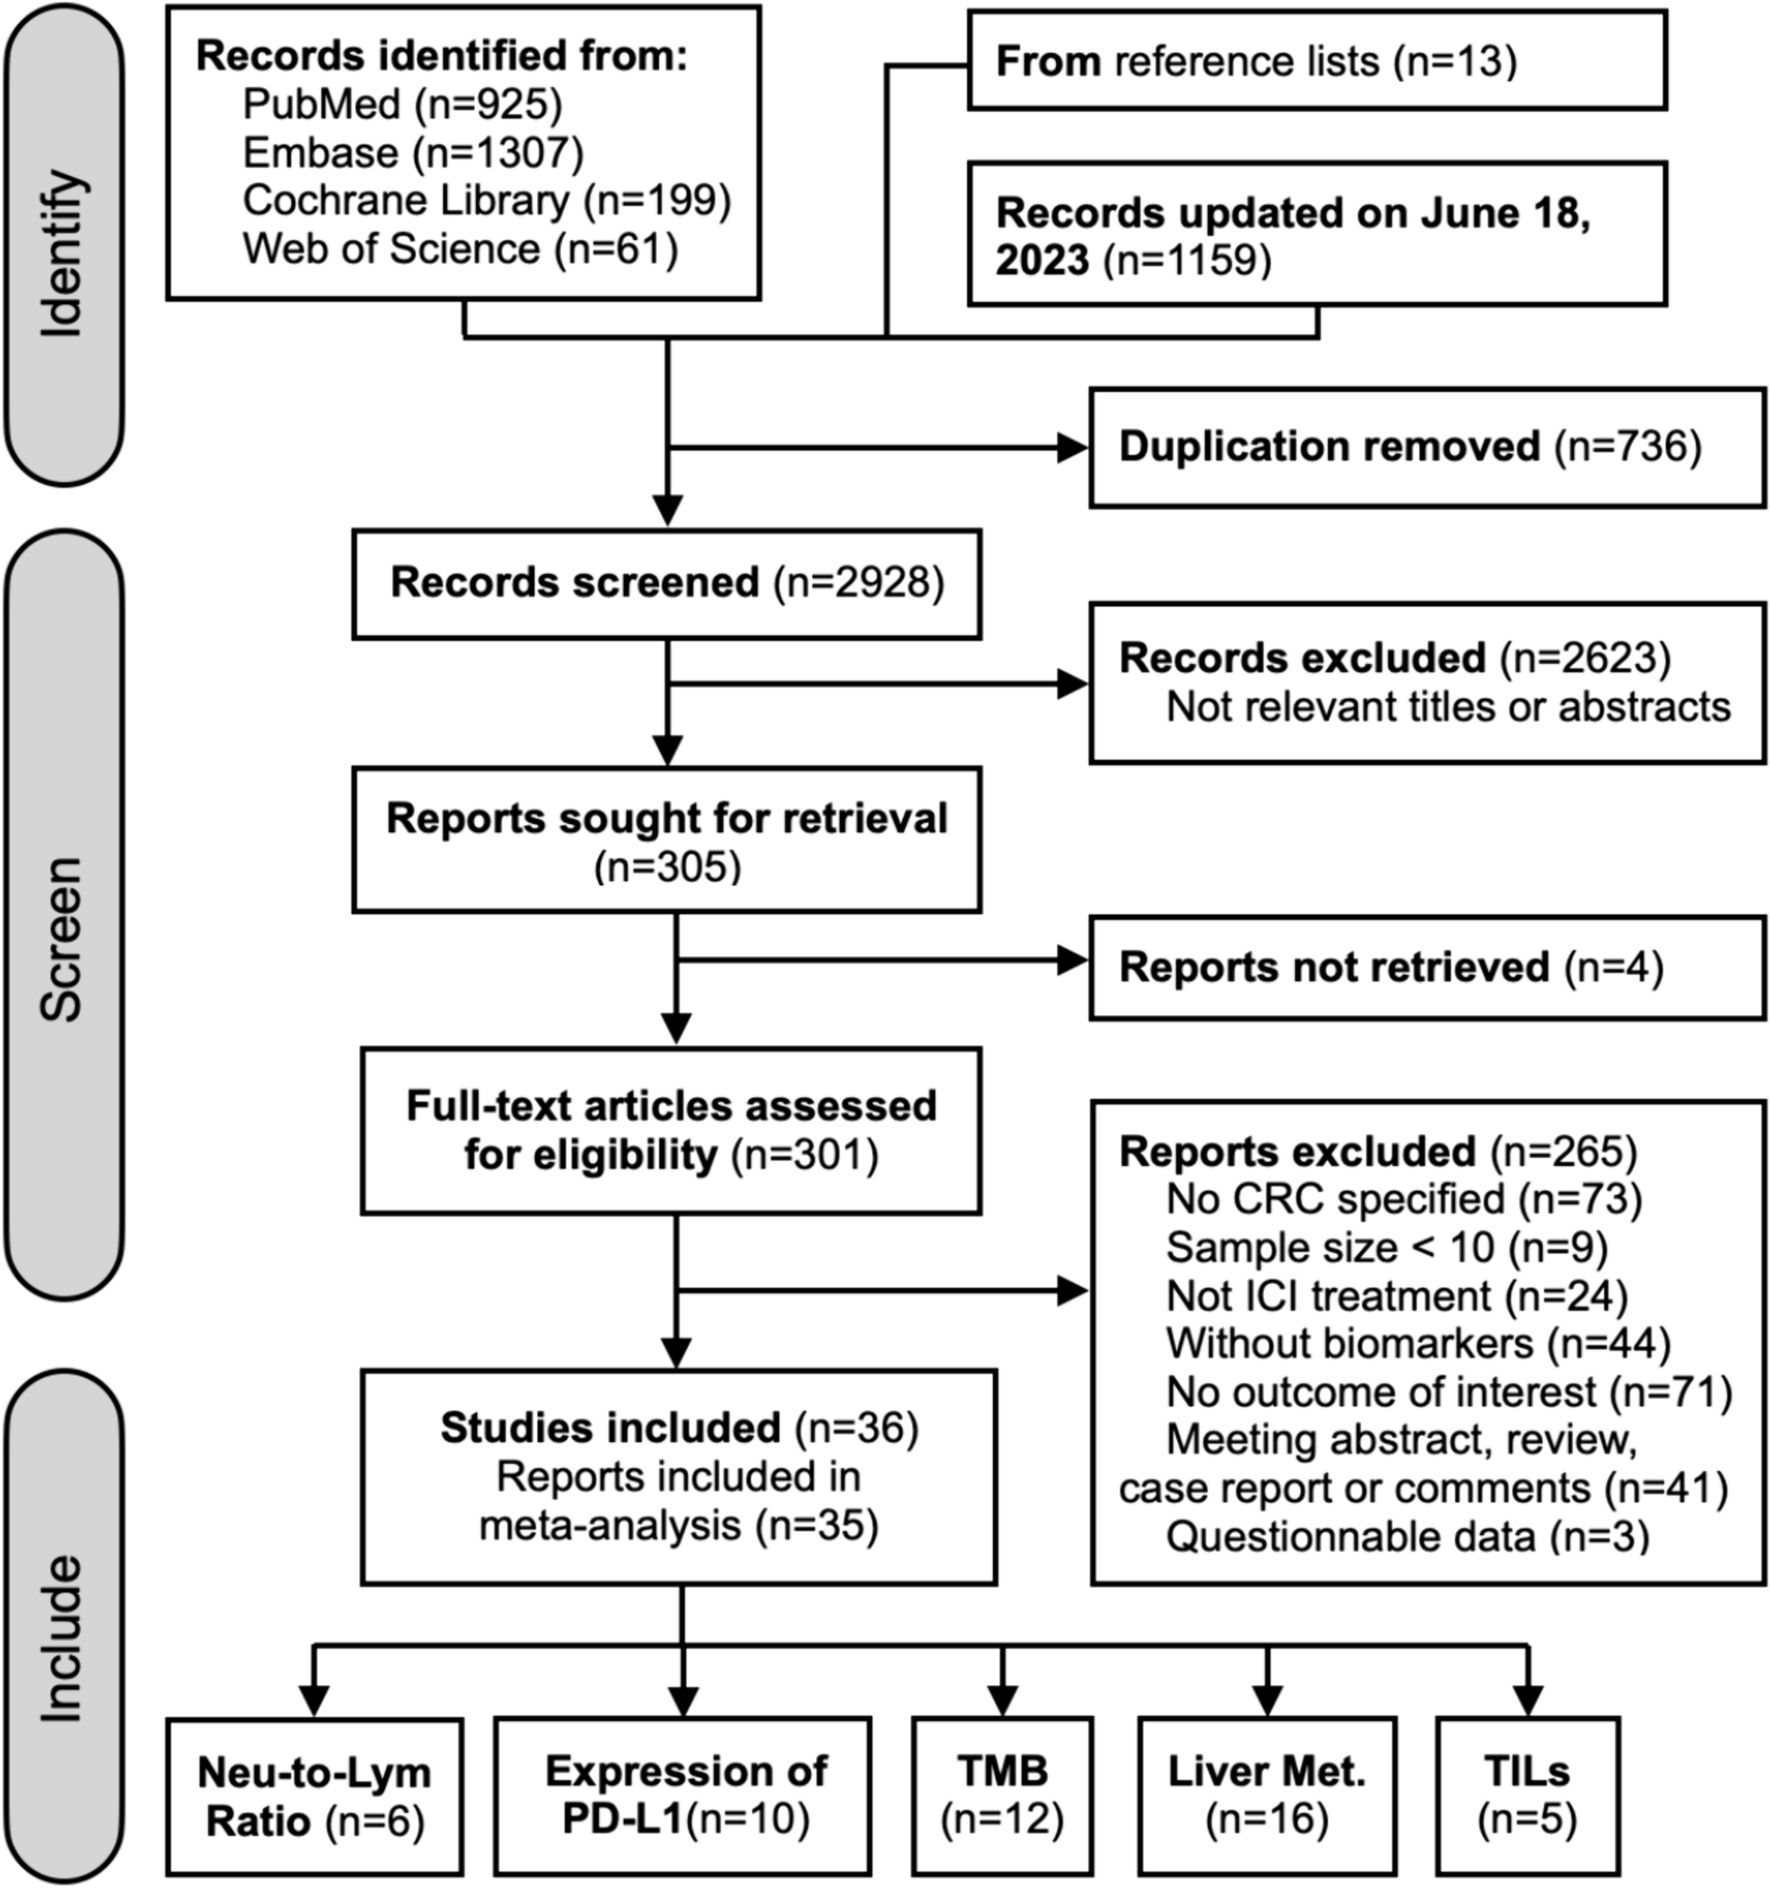 Biomarkers to predict efficacy of immune checkpoint inhibitors in colorectal cancer patients: a systematic review and meta-analysis